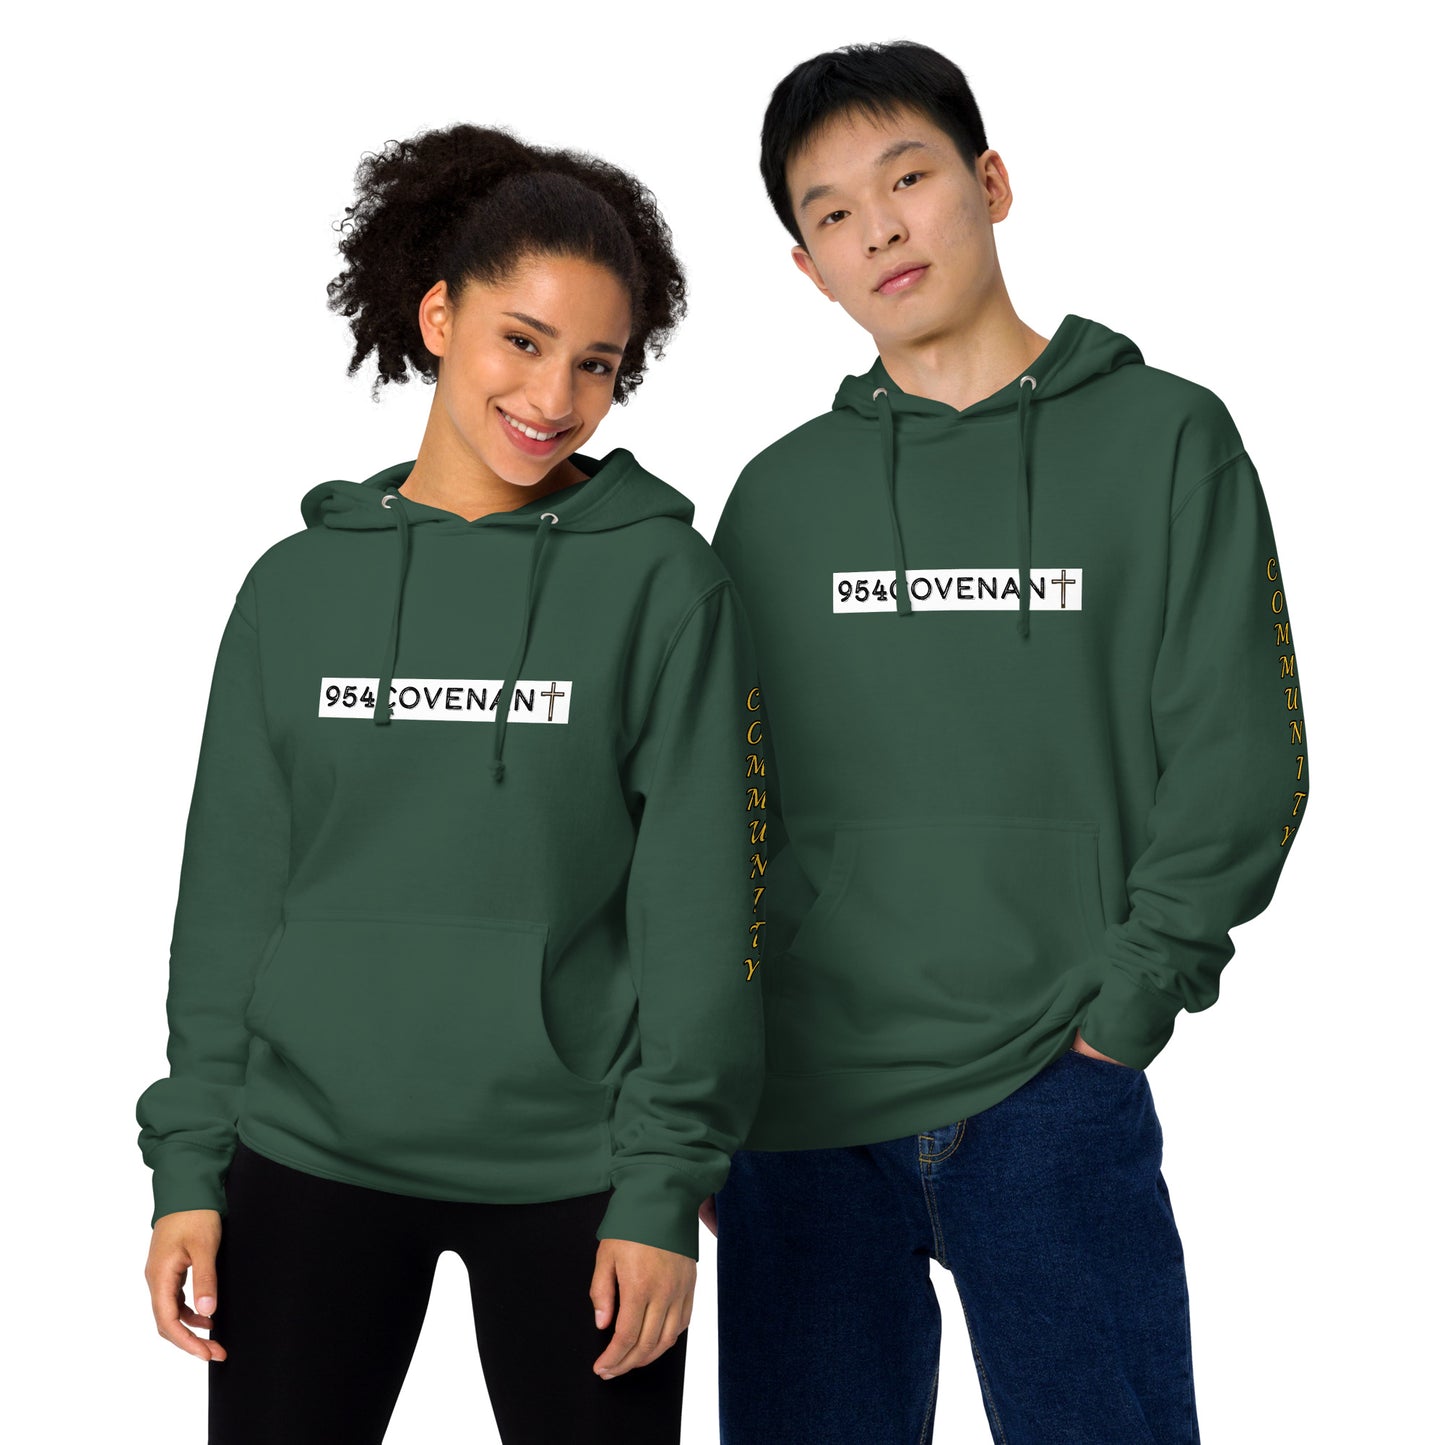 954covenant Unisex midweight hoodie